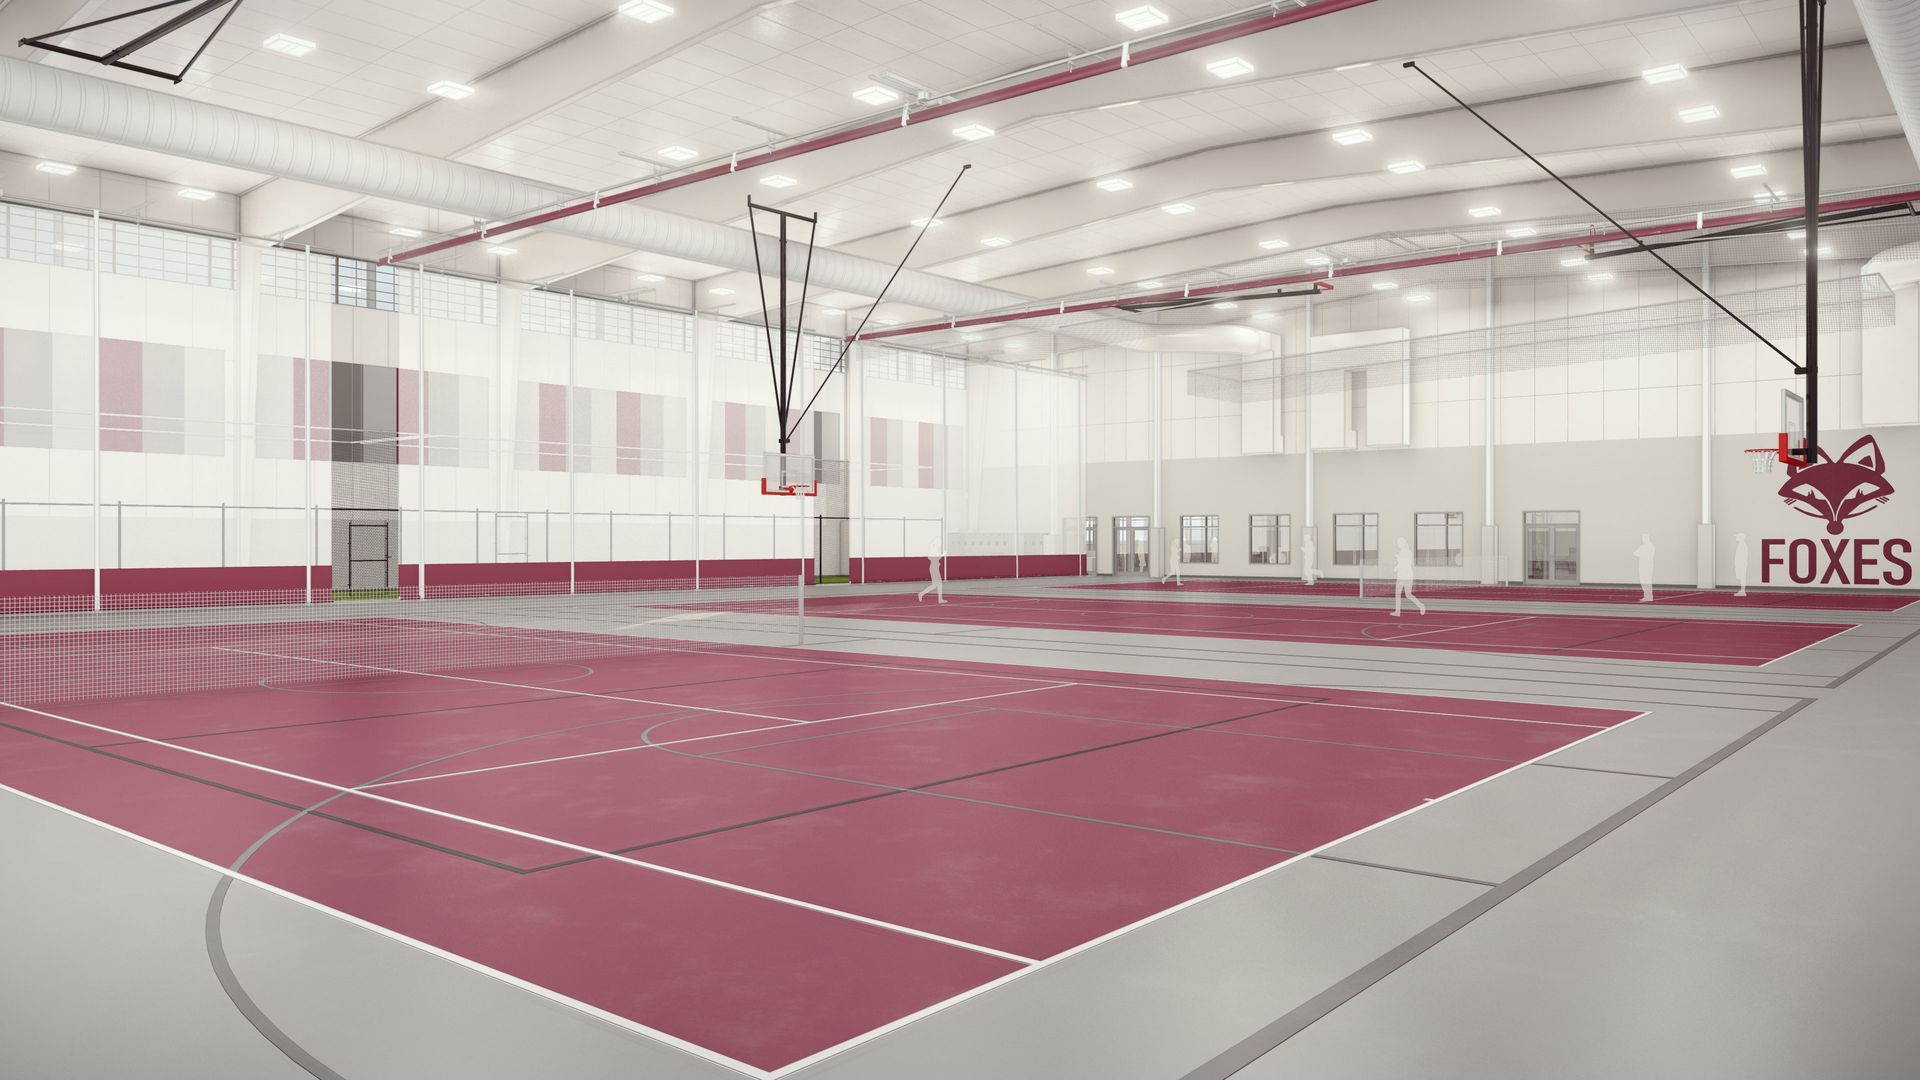 Rendering of the courts inside the Timothy Trout Sports Center